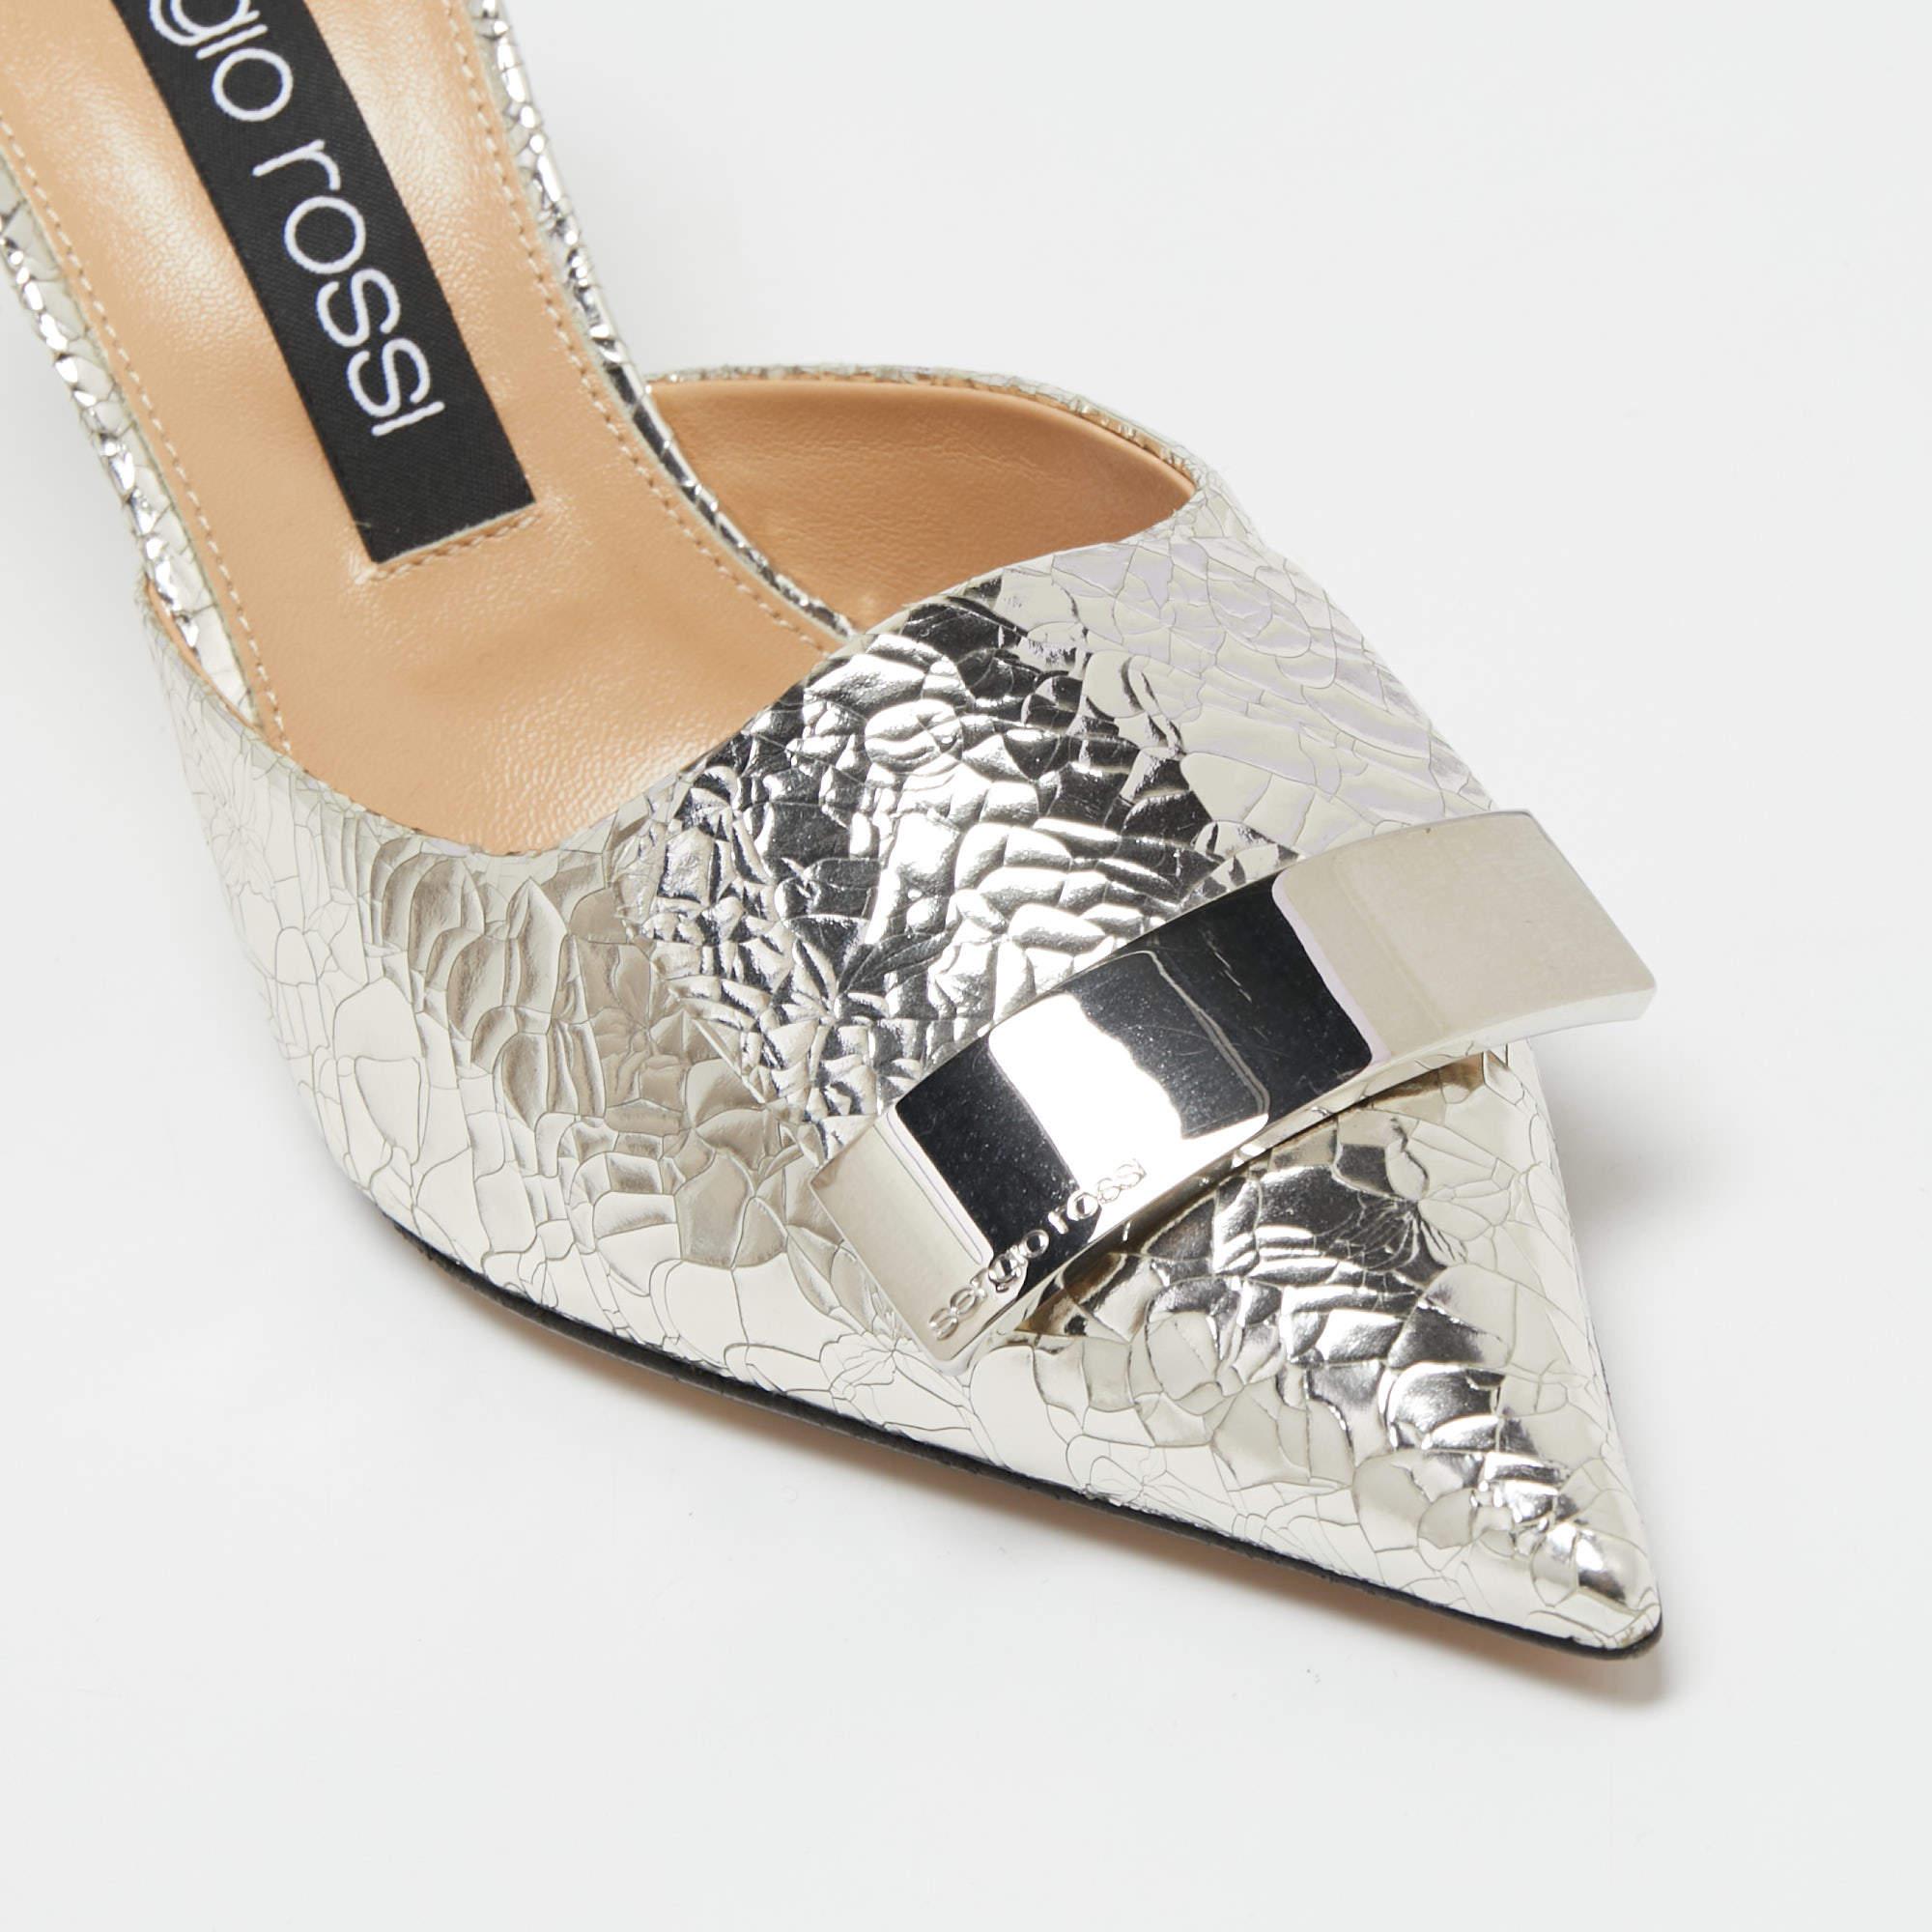 Sergio Rossi Silver Croc Embossed Mule Sandals Size 40 3